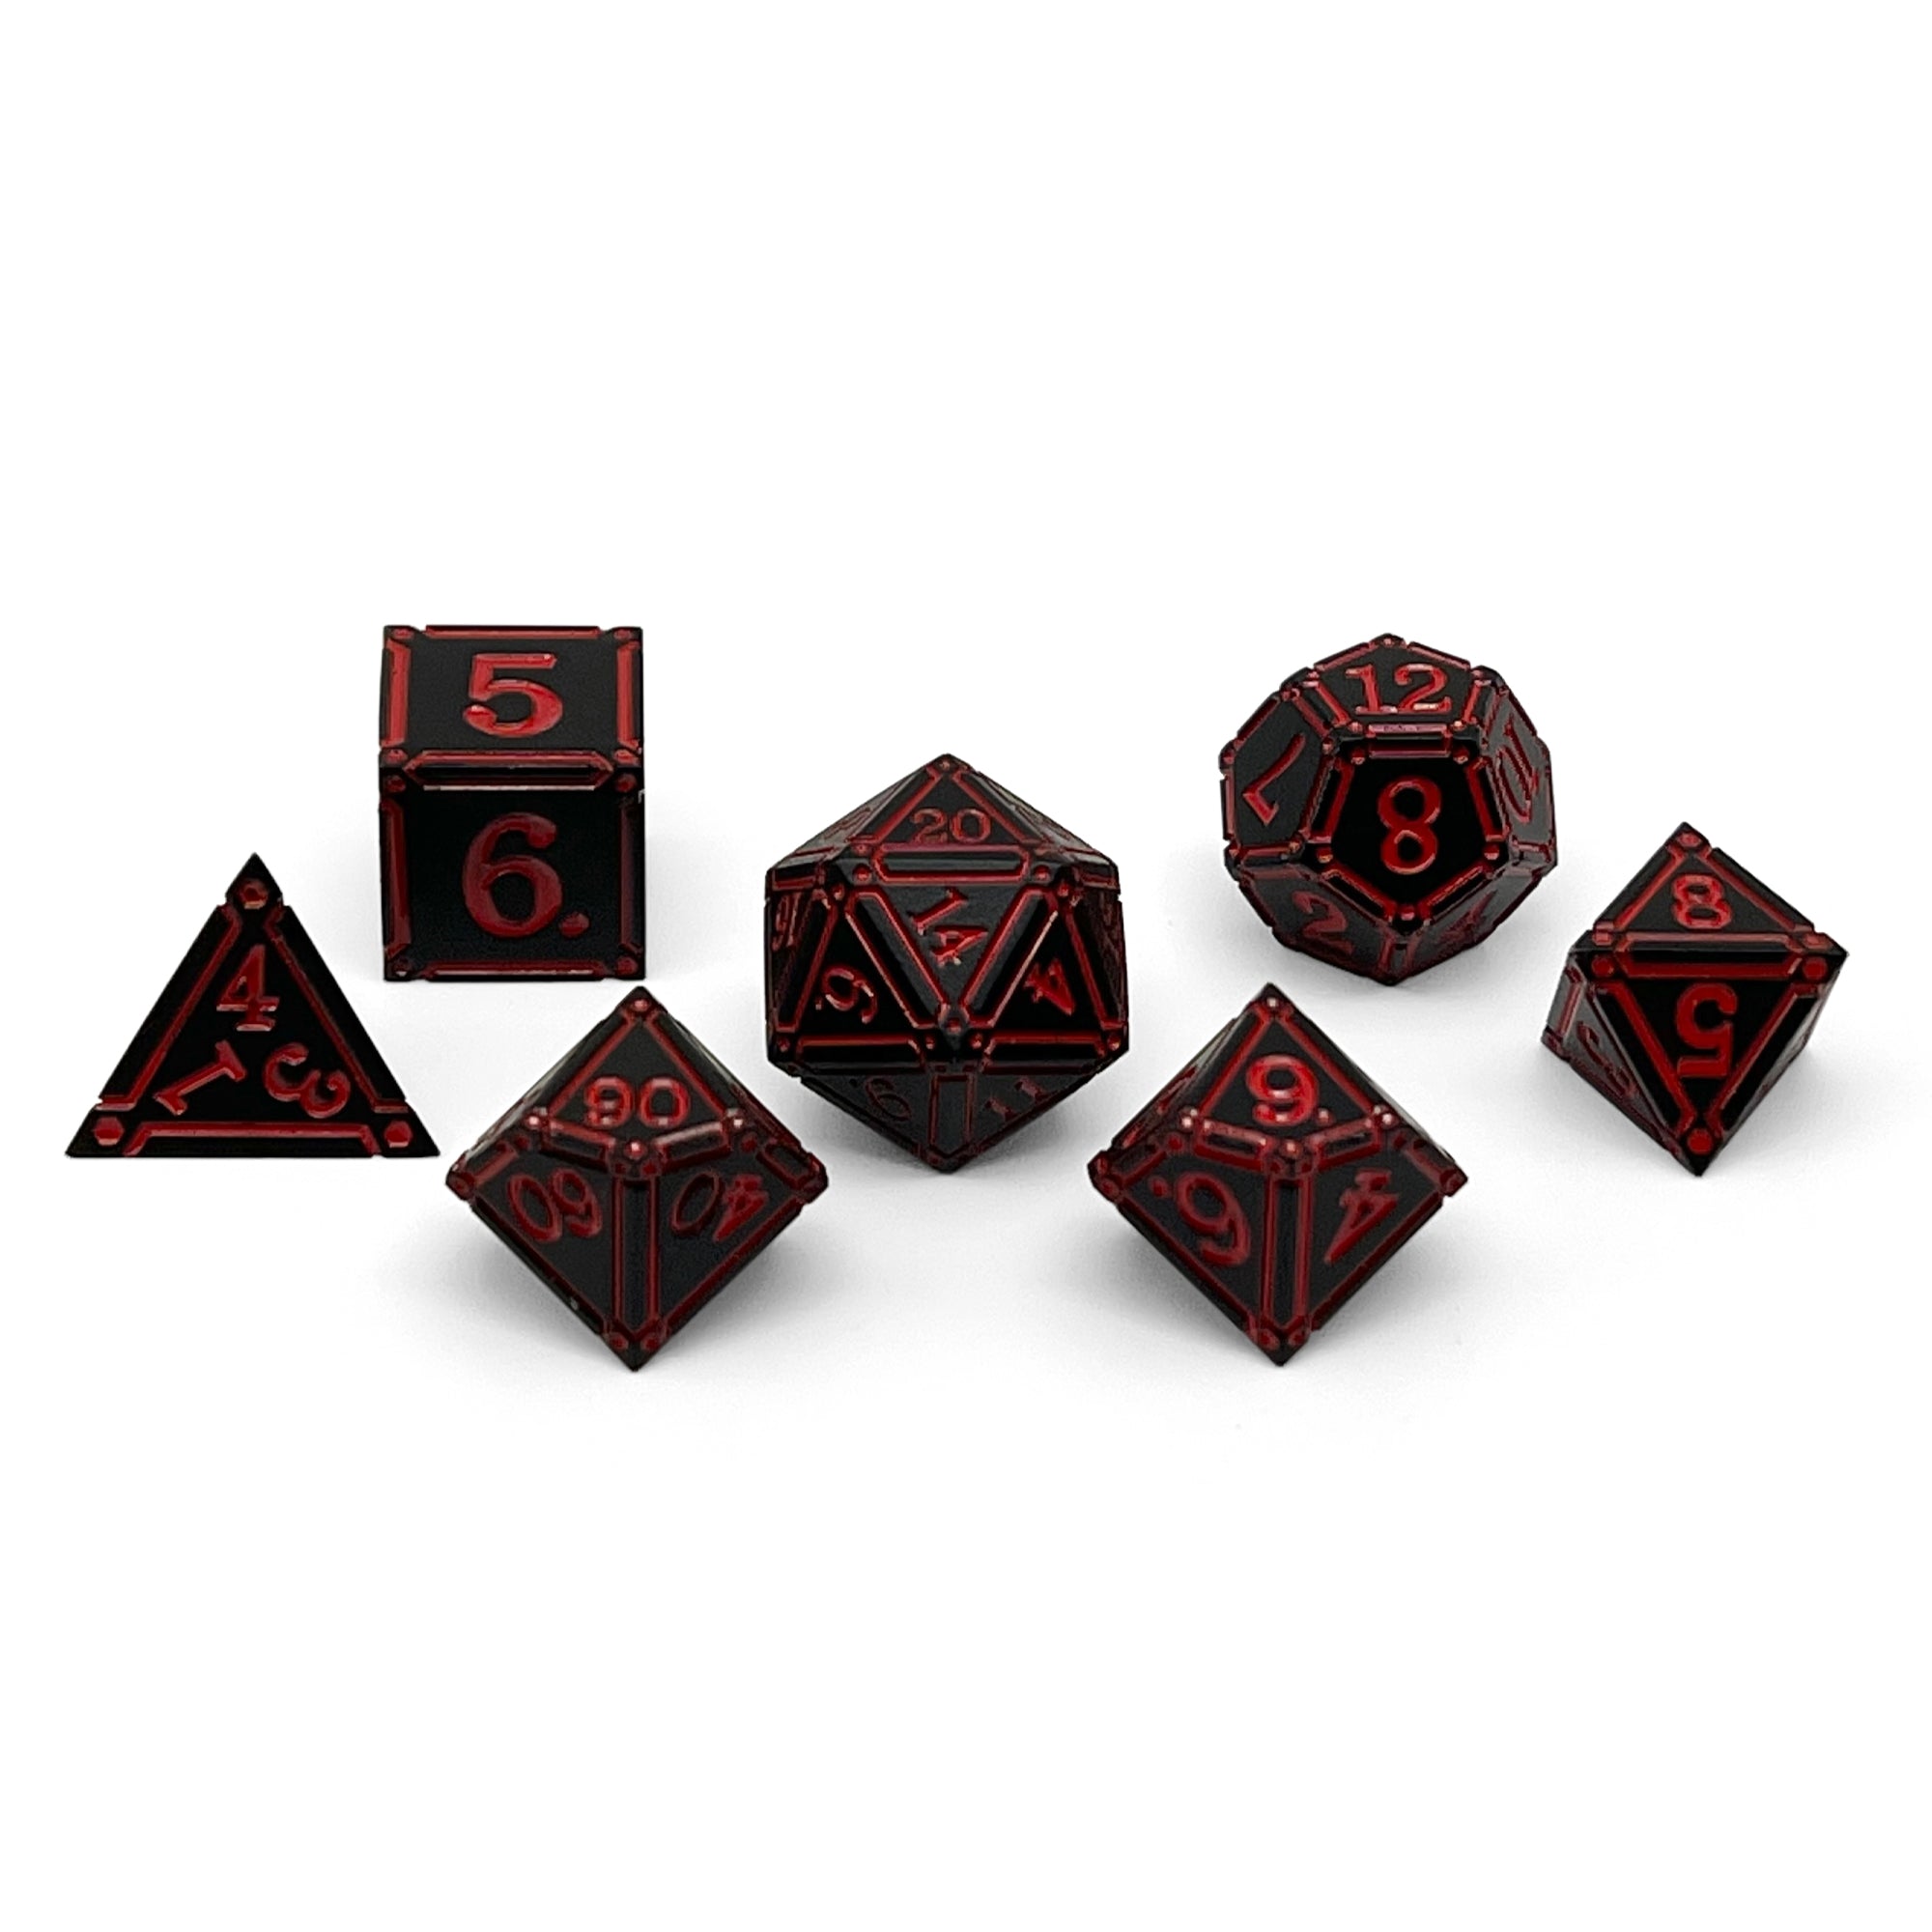 Ironworks - Efreet Flames 7 Piece RPG set Alloy Dice